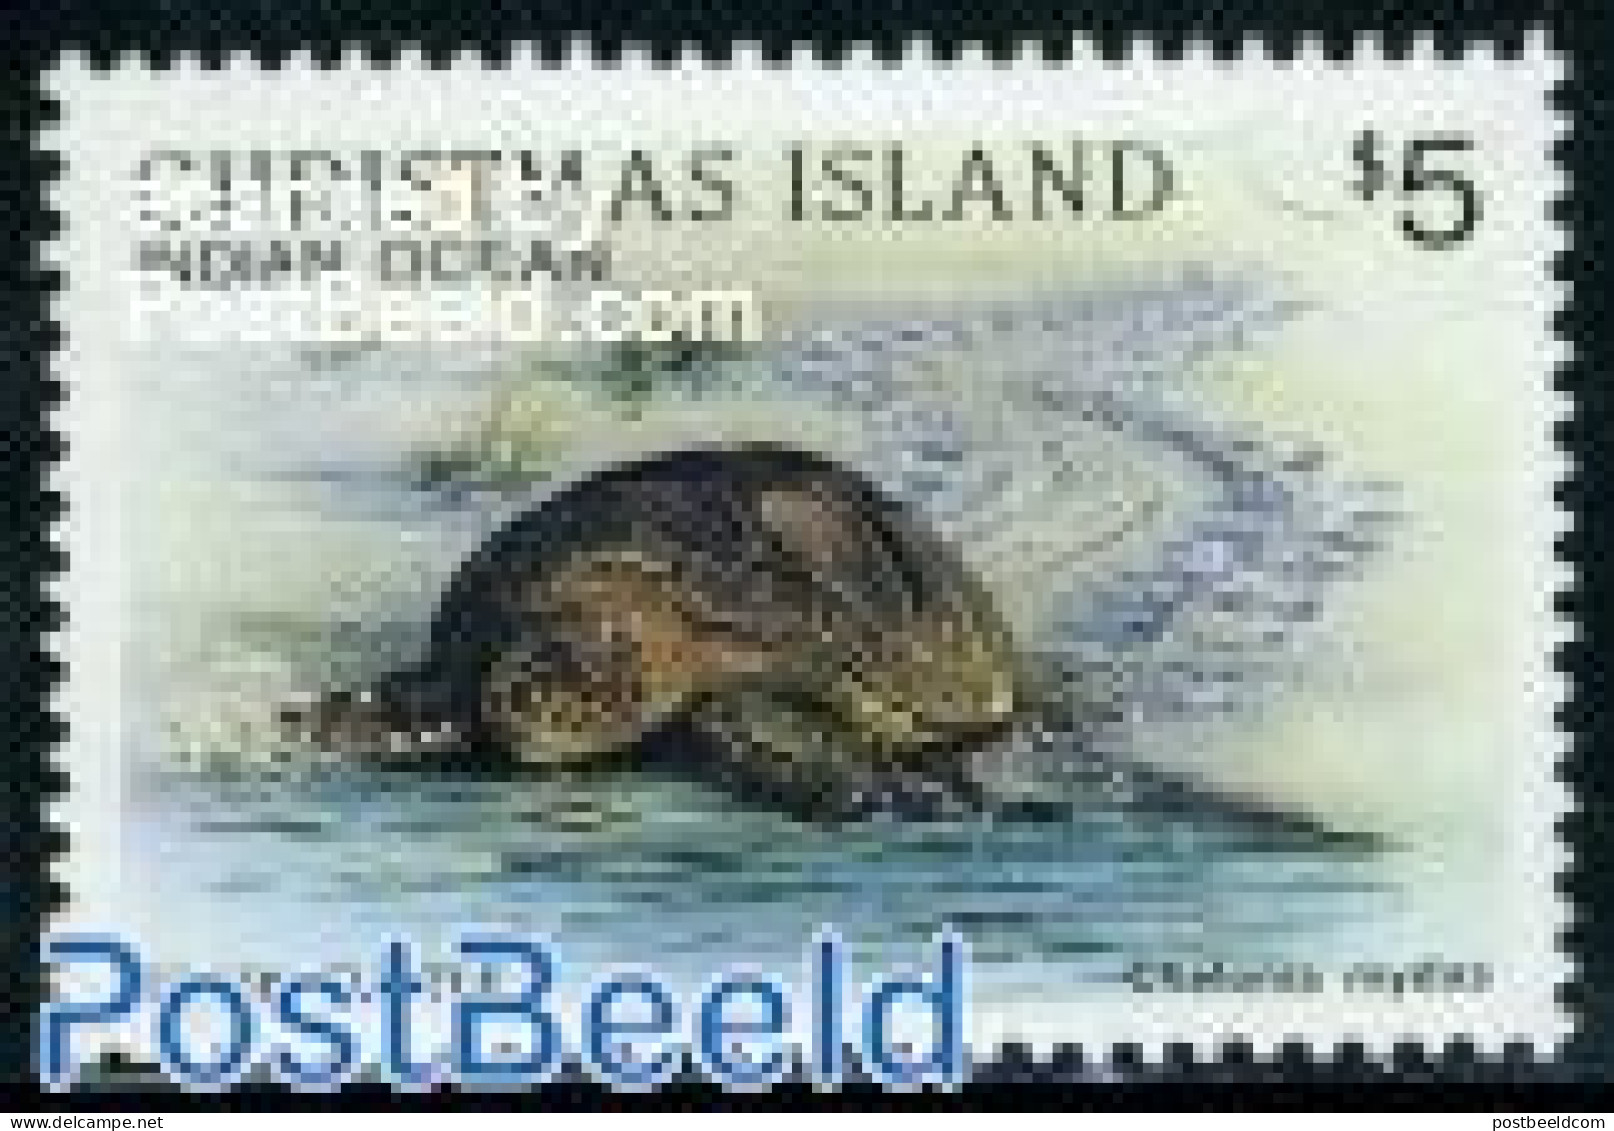 Christmas Islands 1987 Stamp Out Of Set, Mint NH, Nature - Reptiles - Turtles - Christmas Island